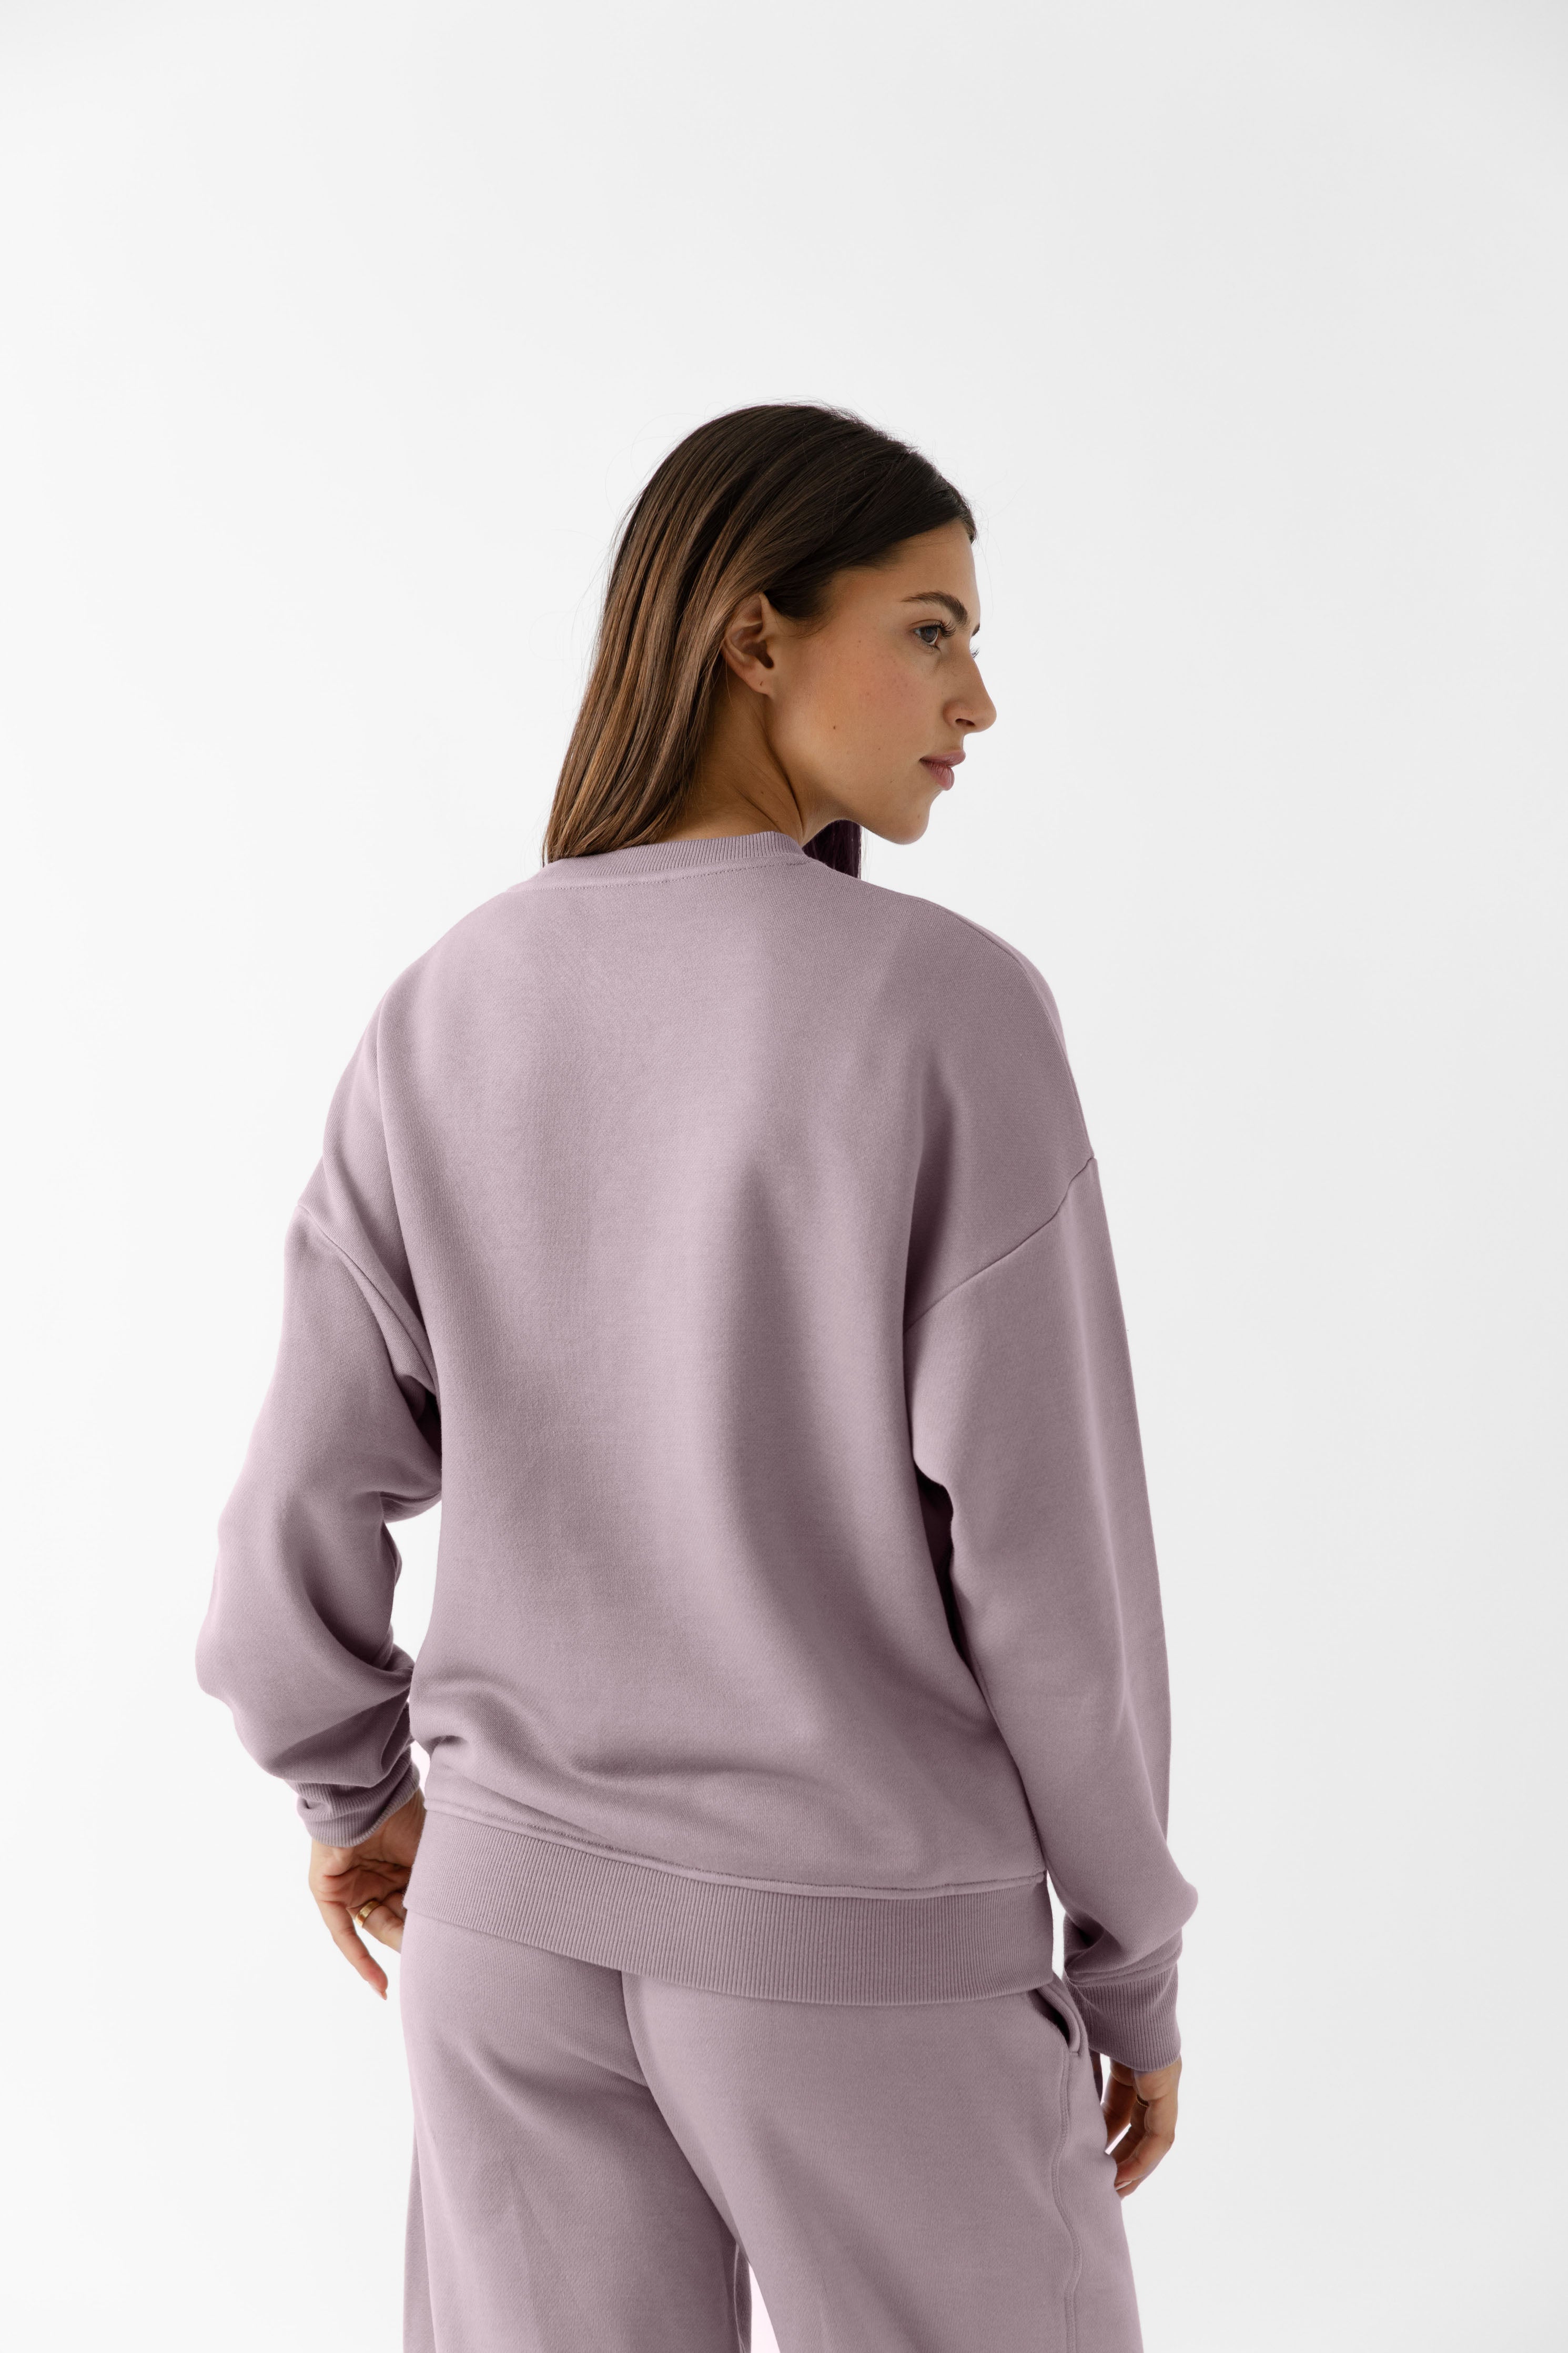 Dusty Orchid CityScape Pullover Crew. The Pullover is being worn by a female model. Accompanying city scape clothing is being worn to complete the look of the outfit. The photo was taken with a white background. |Color:Dusty Orchid